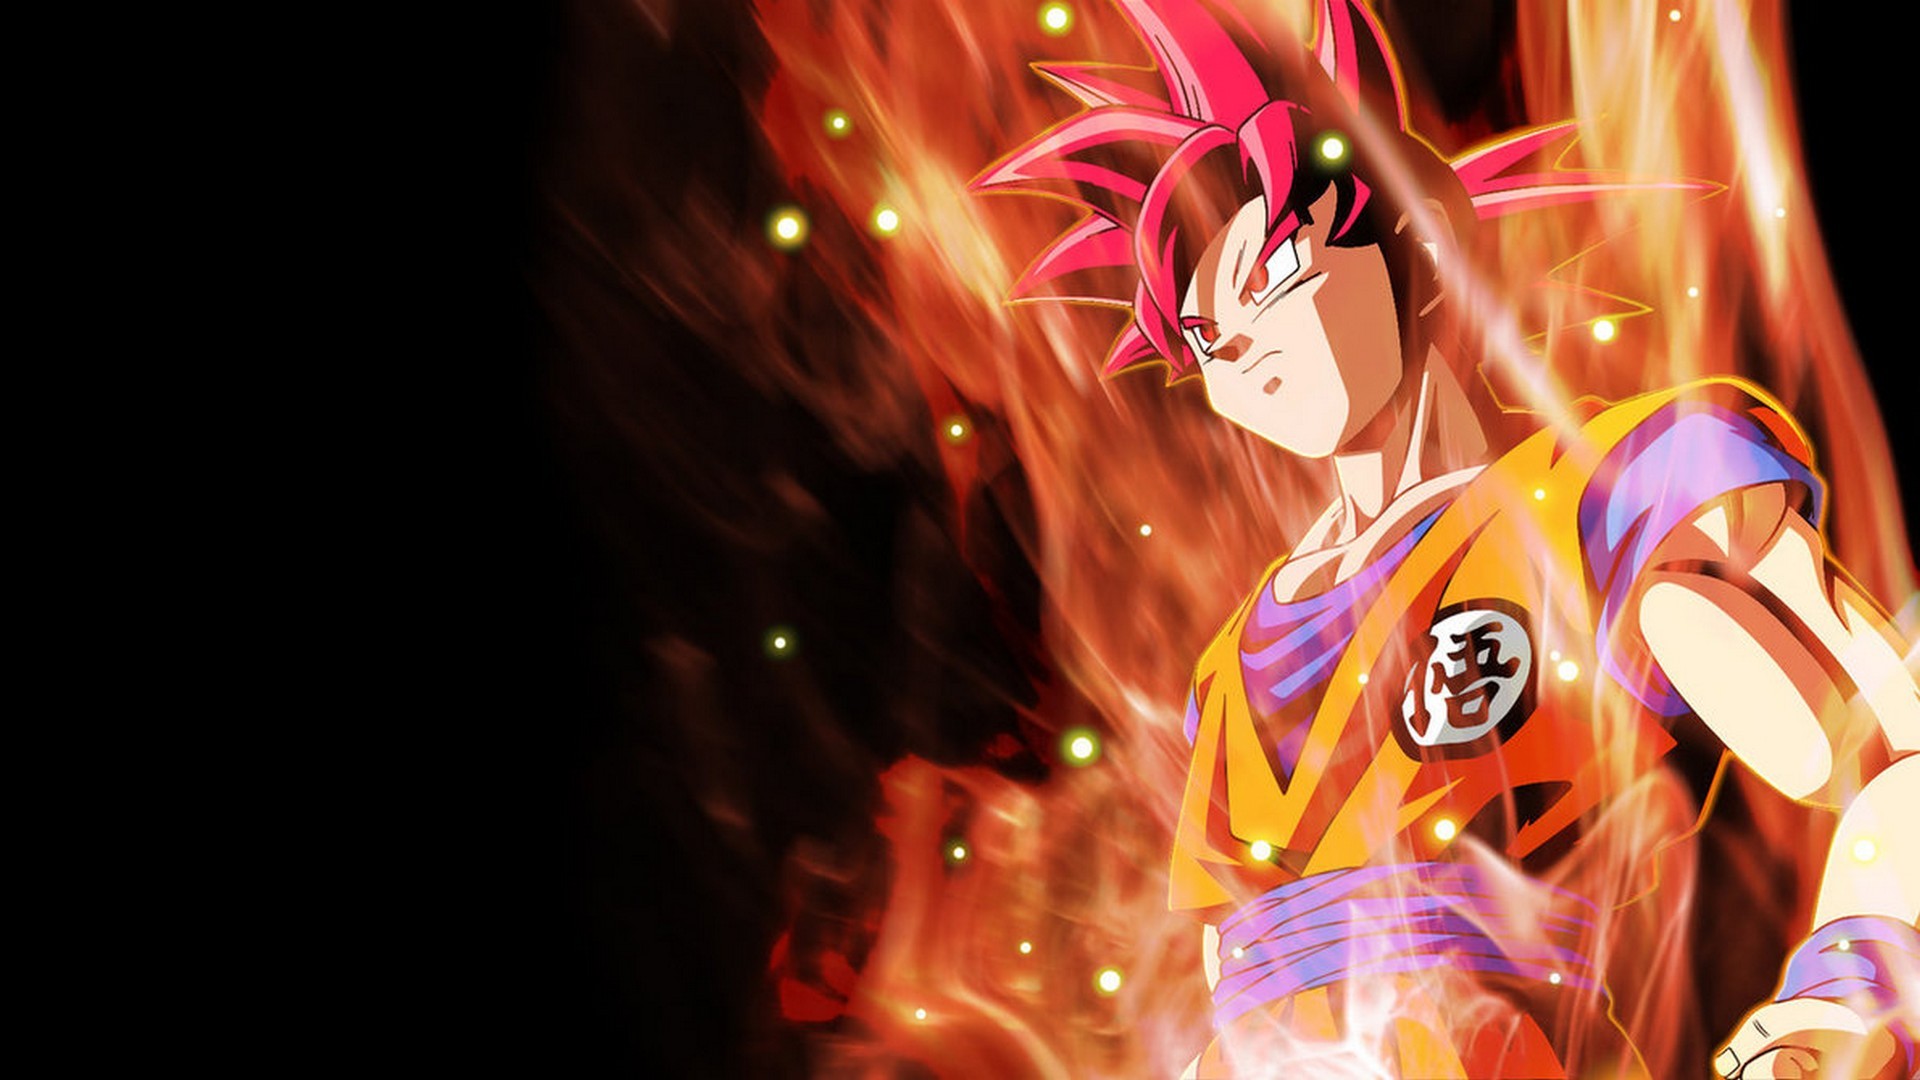 Wallpapers Goku Super Saiyan God with image resolution 1920x1080 pixel. You can make this wallpaper for your Desktop Computer Backgrounds, Mac Wallpapers, Android Lock screen or iPhone Screensavers